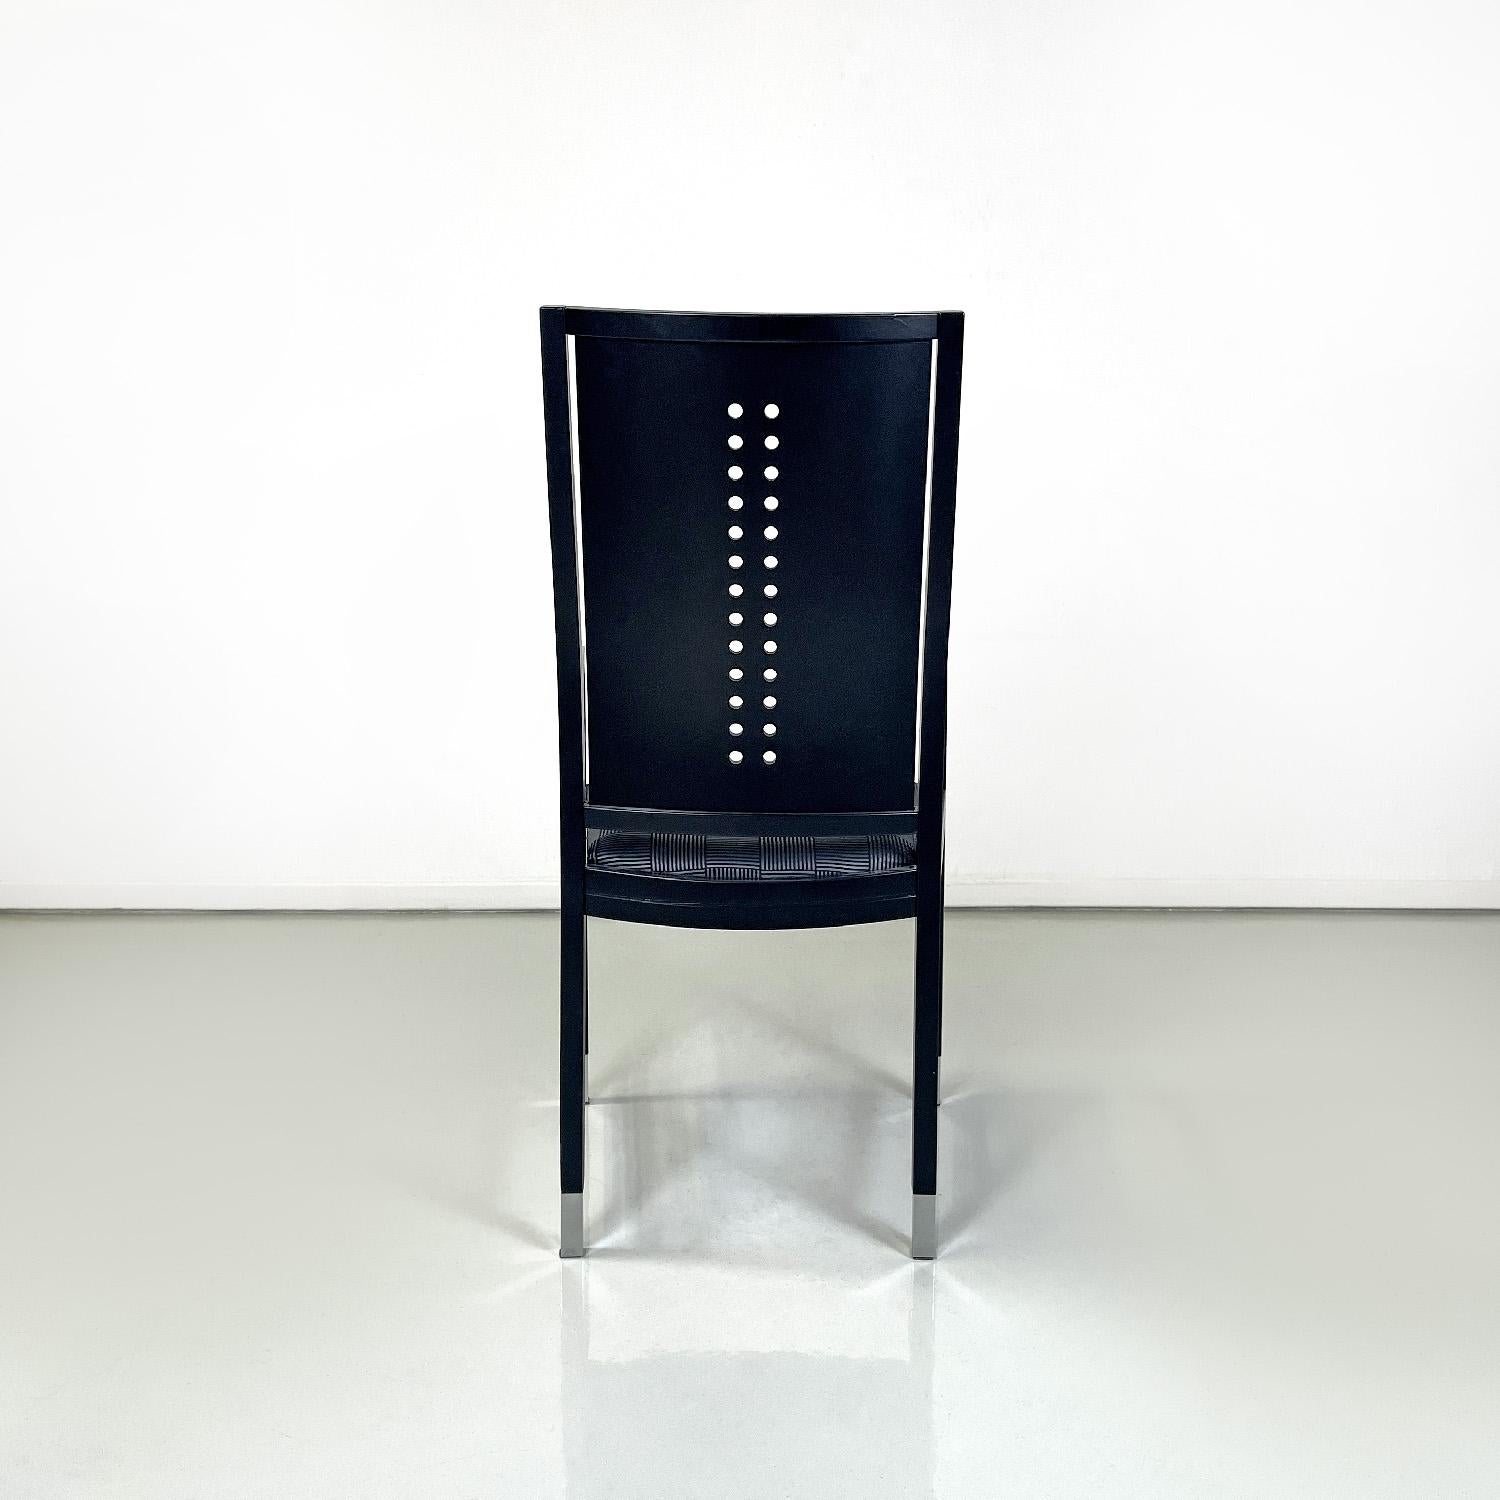 Late 20th Century Austrian modern black wooden chairs by Ernst W. Beranek for Thonet, 1990s For Sale